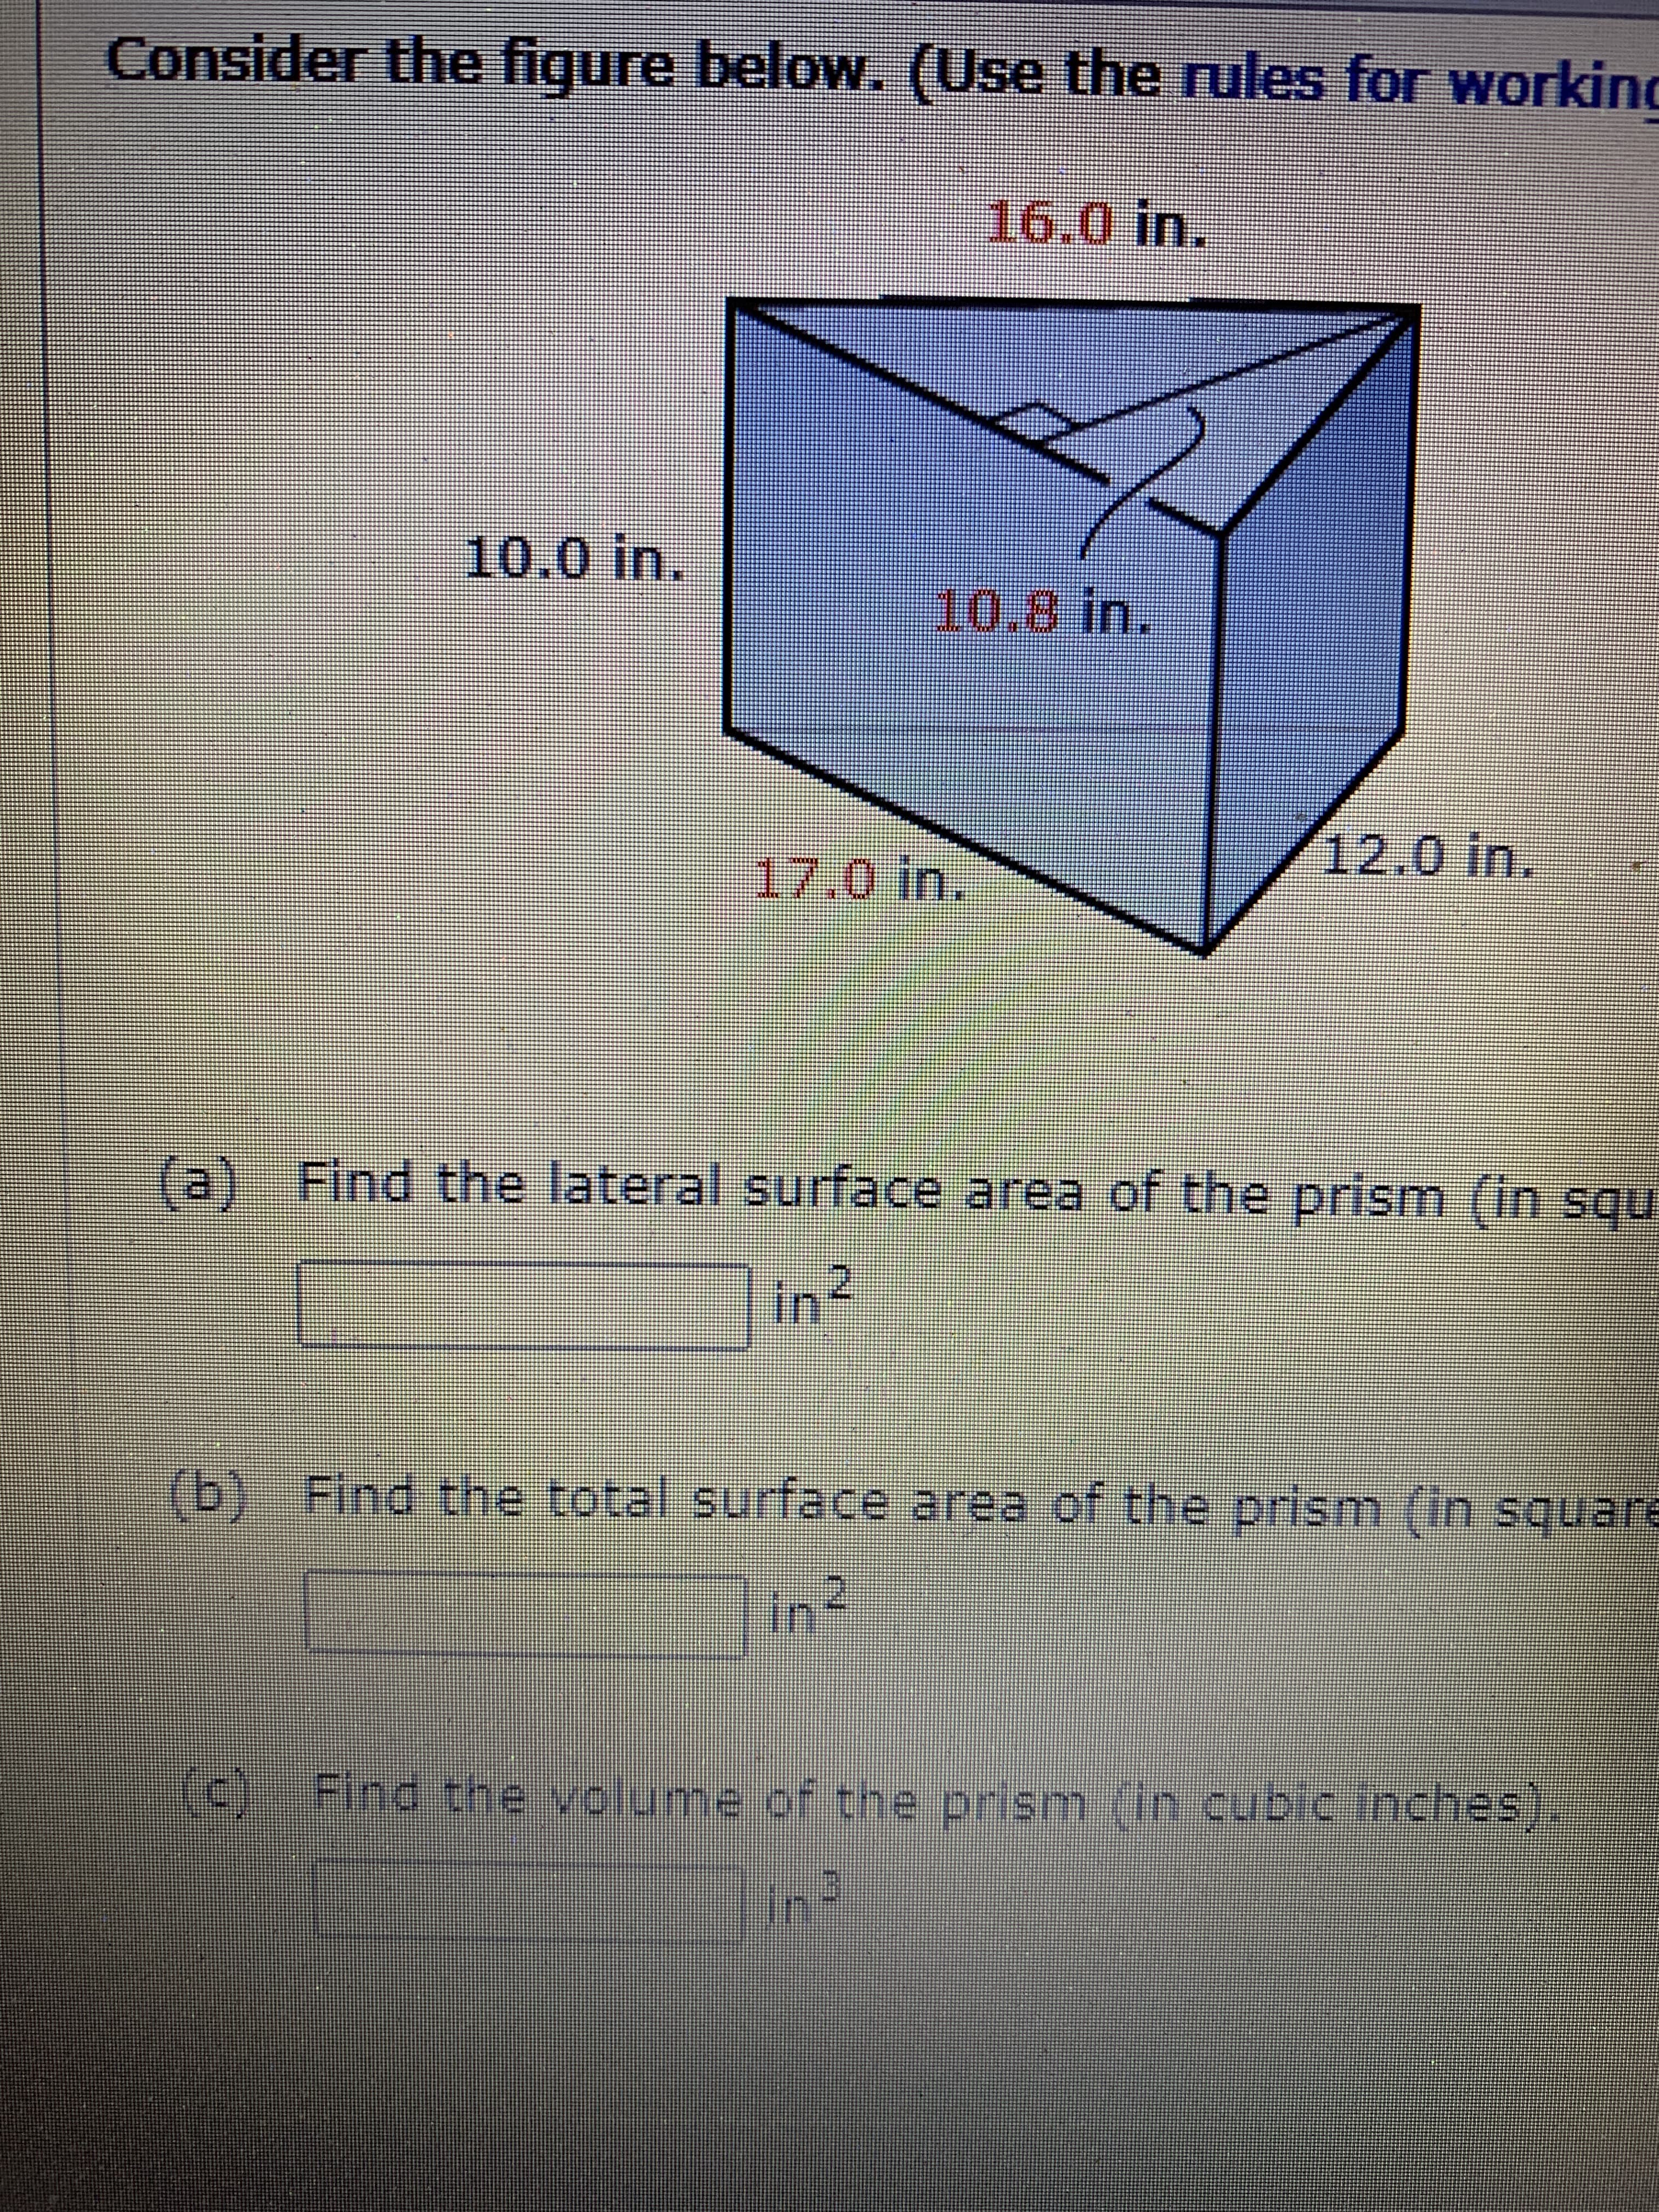 (0) Find the volume of the prism (in cubic inches).
ind
